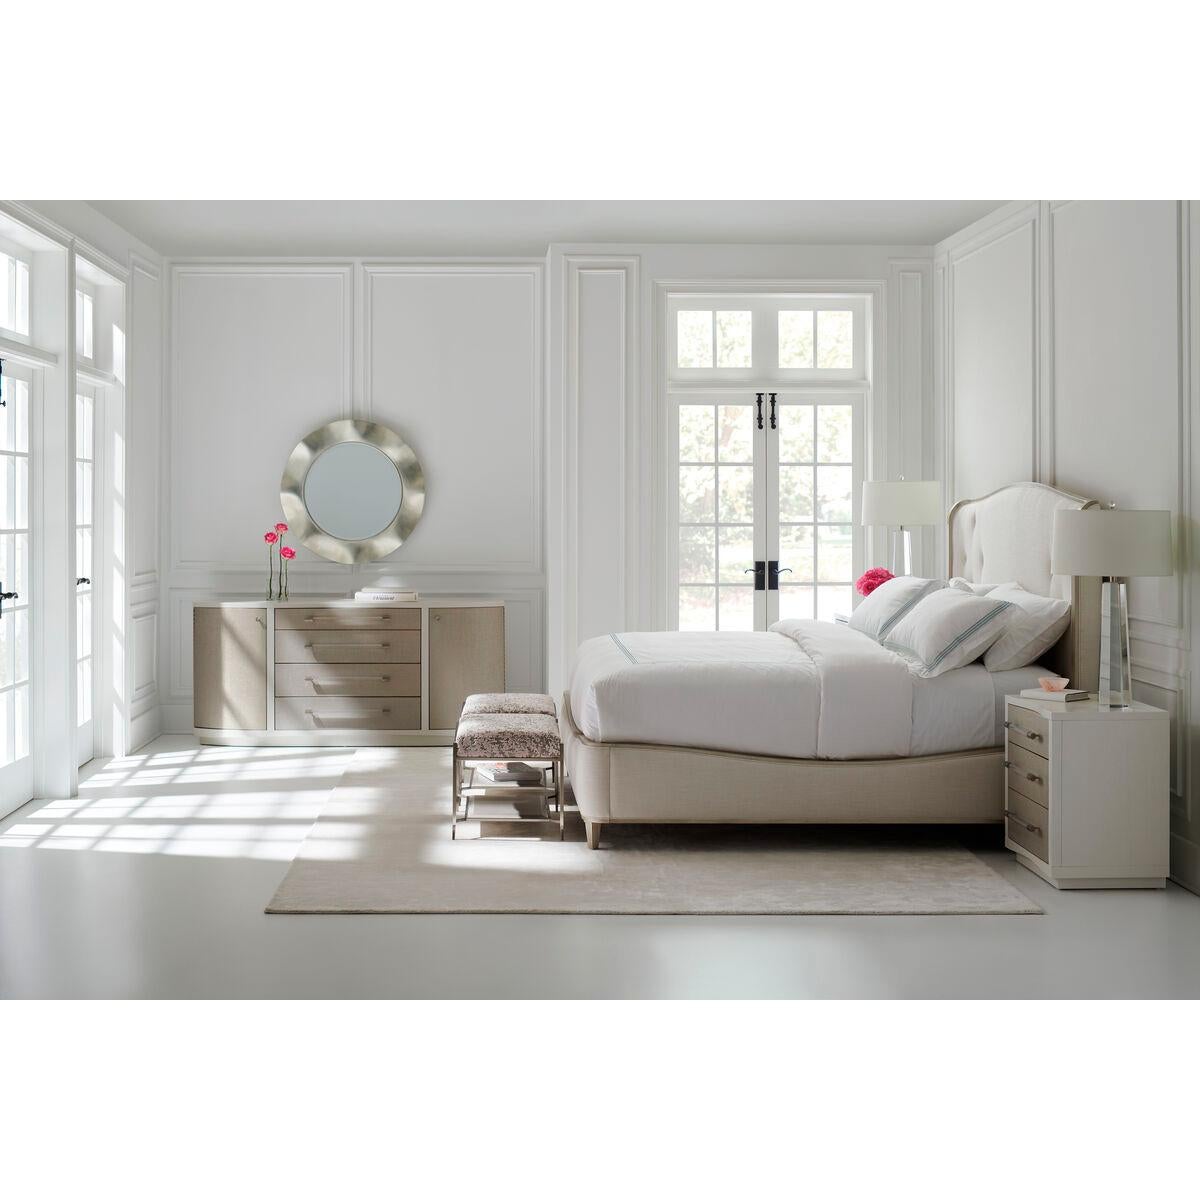 Flowing lines and gentle curves make this upholstered bed complementary to many styles, while having an influential presence of its own.
Button-pull details and an exposed wood frame in Silver Charm paint accentuate the headboard’s slight wing